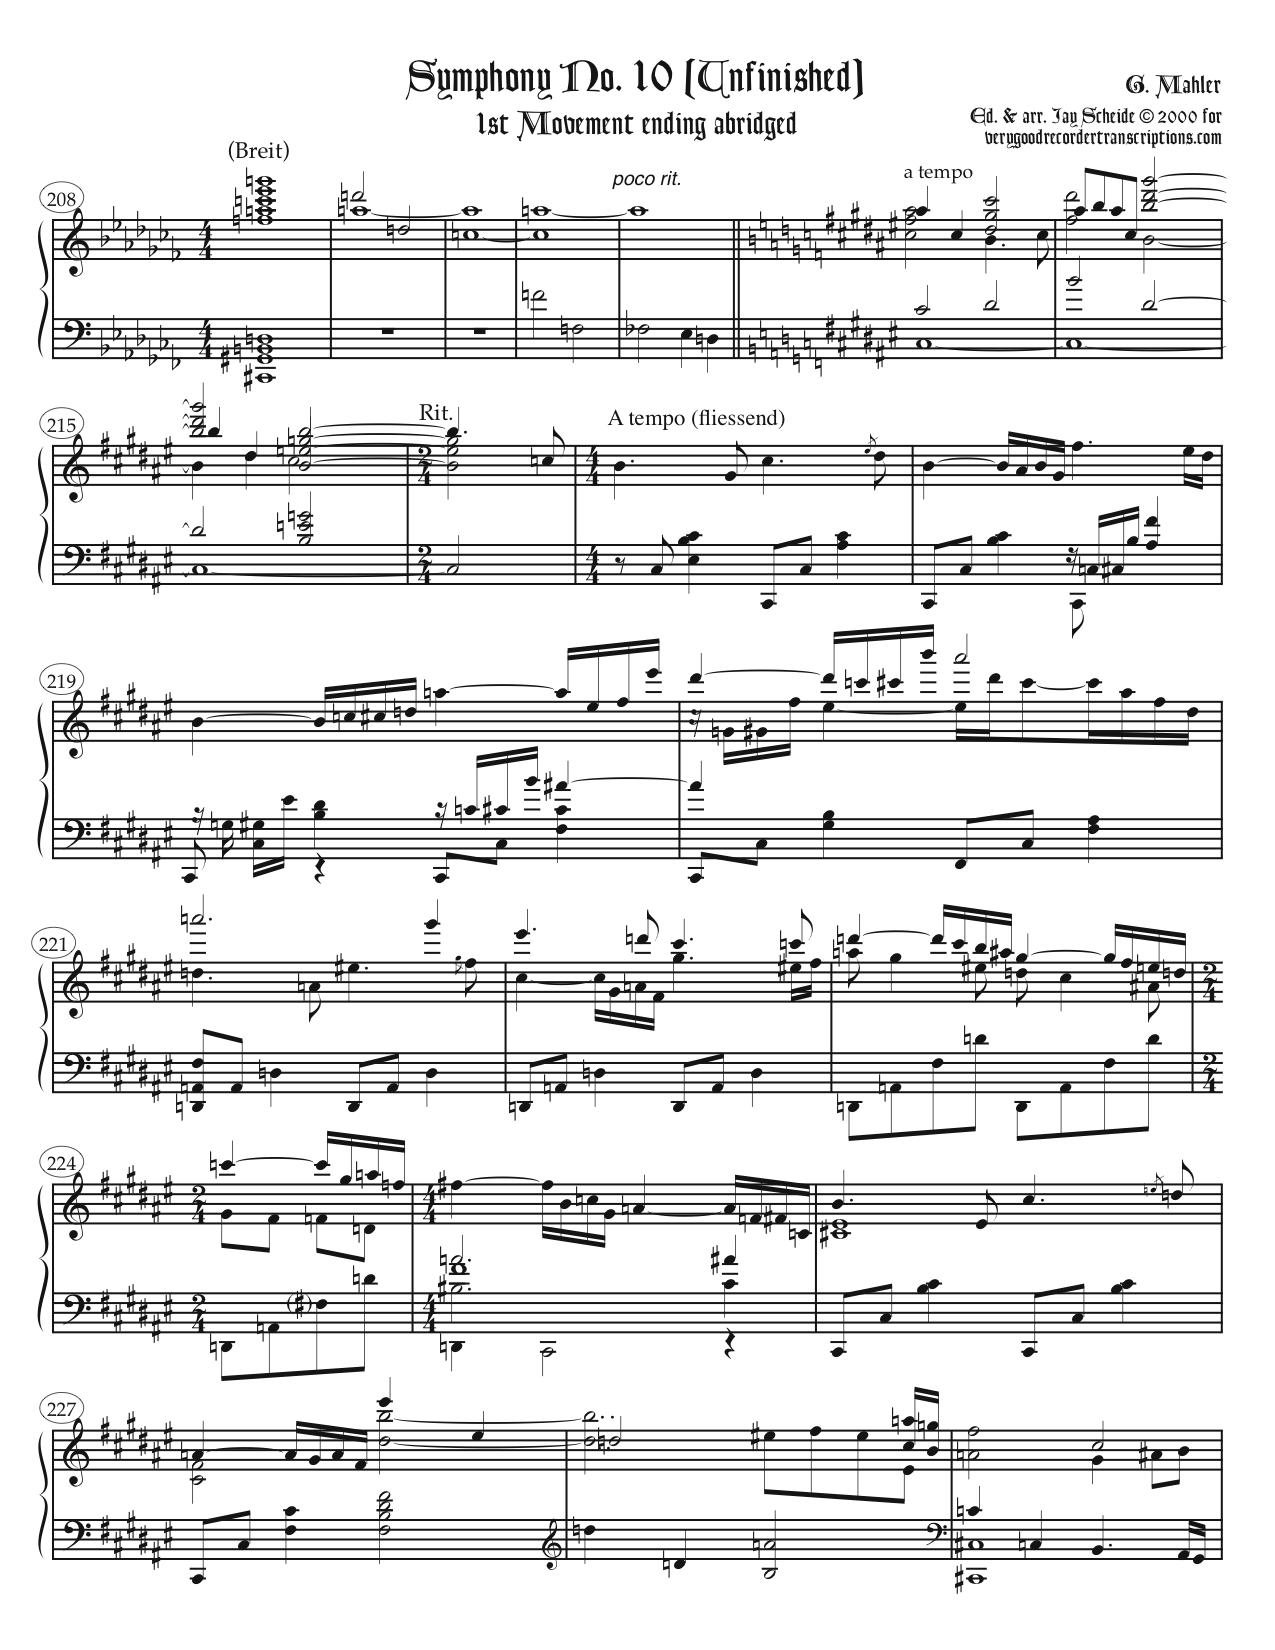 Ending of the first movement of Symphony No. 10, abridged